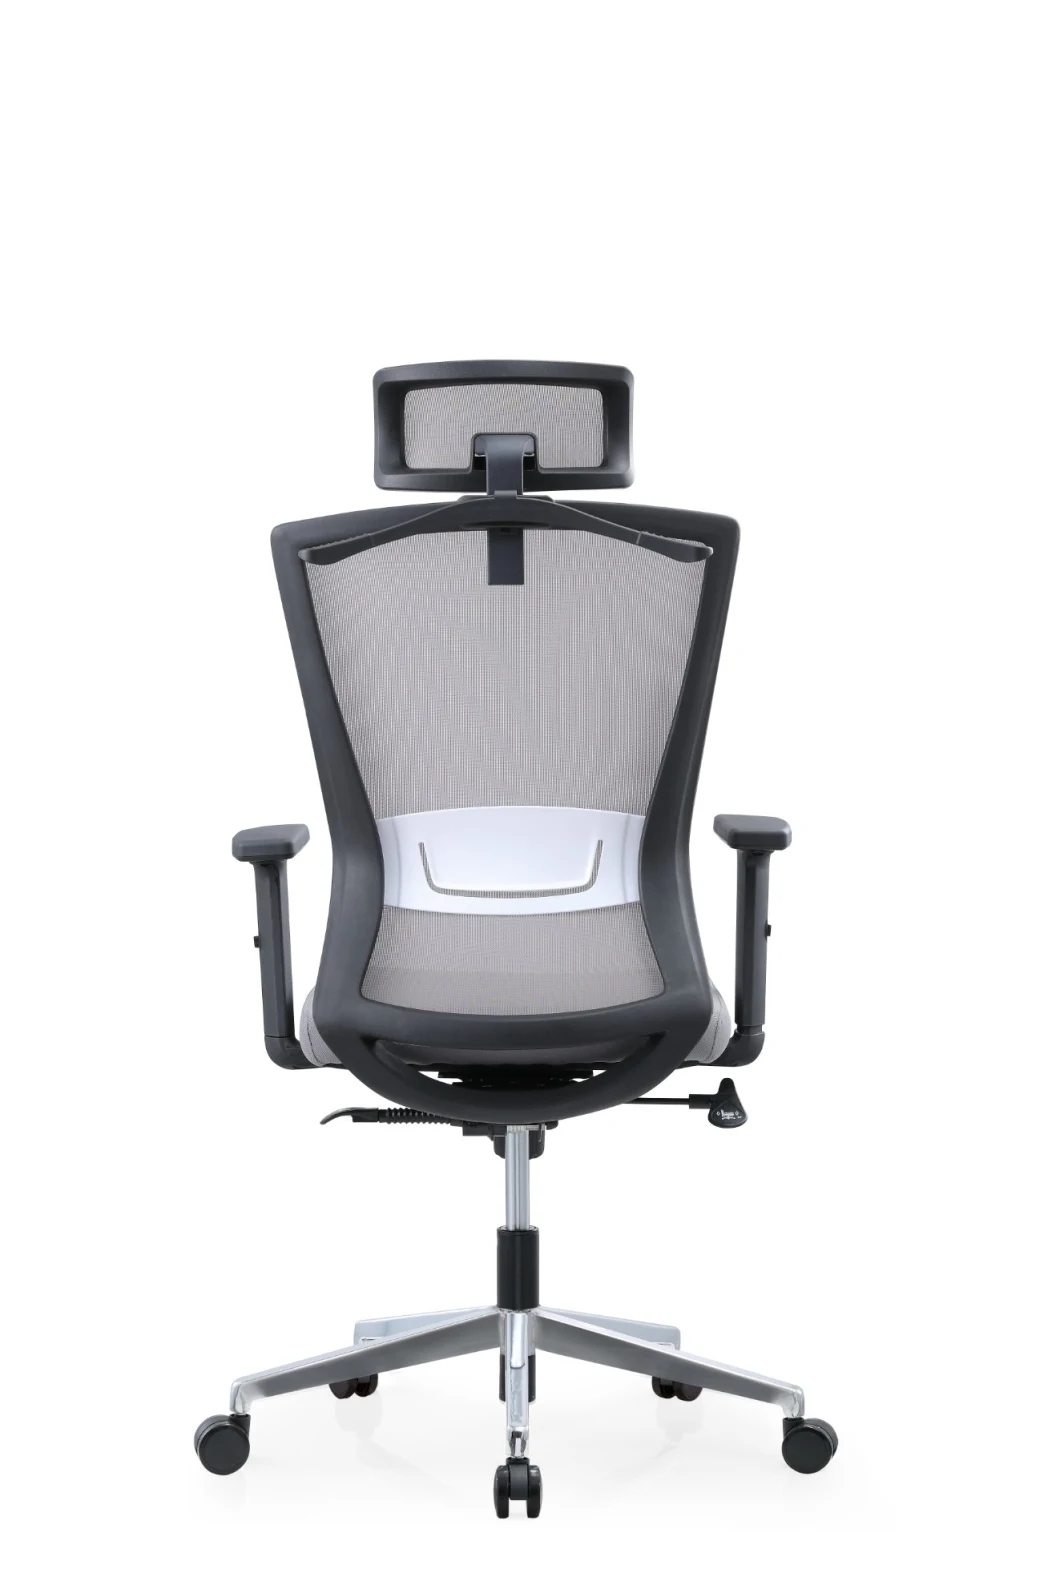 Wholesale on Sale Black Executive Office Desk Chair CEO Boss Managaer Mesh Fabric Chair